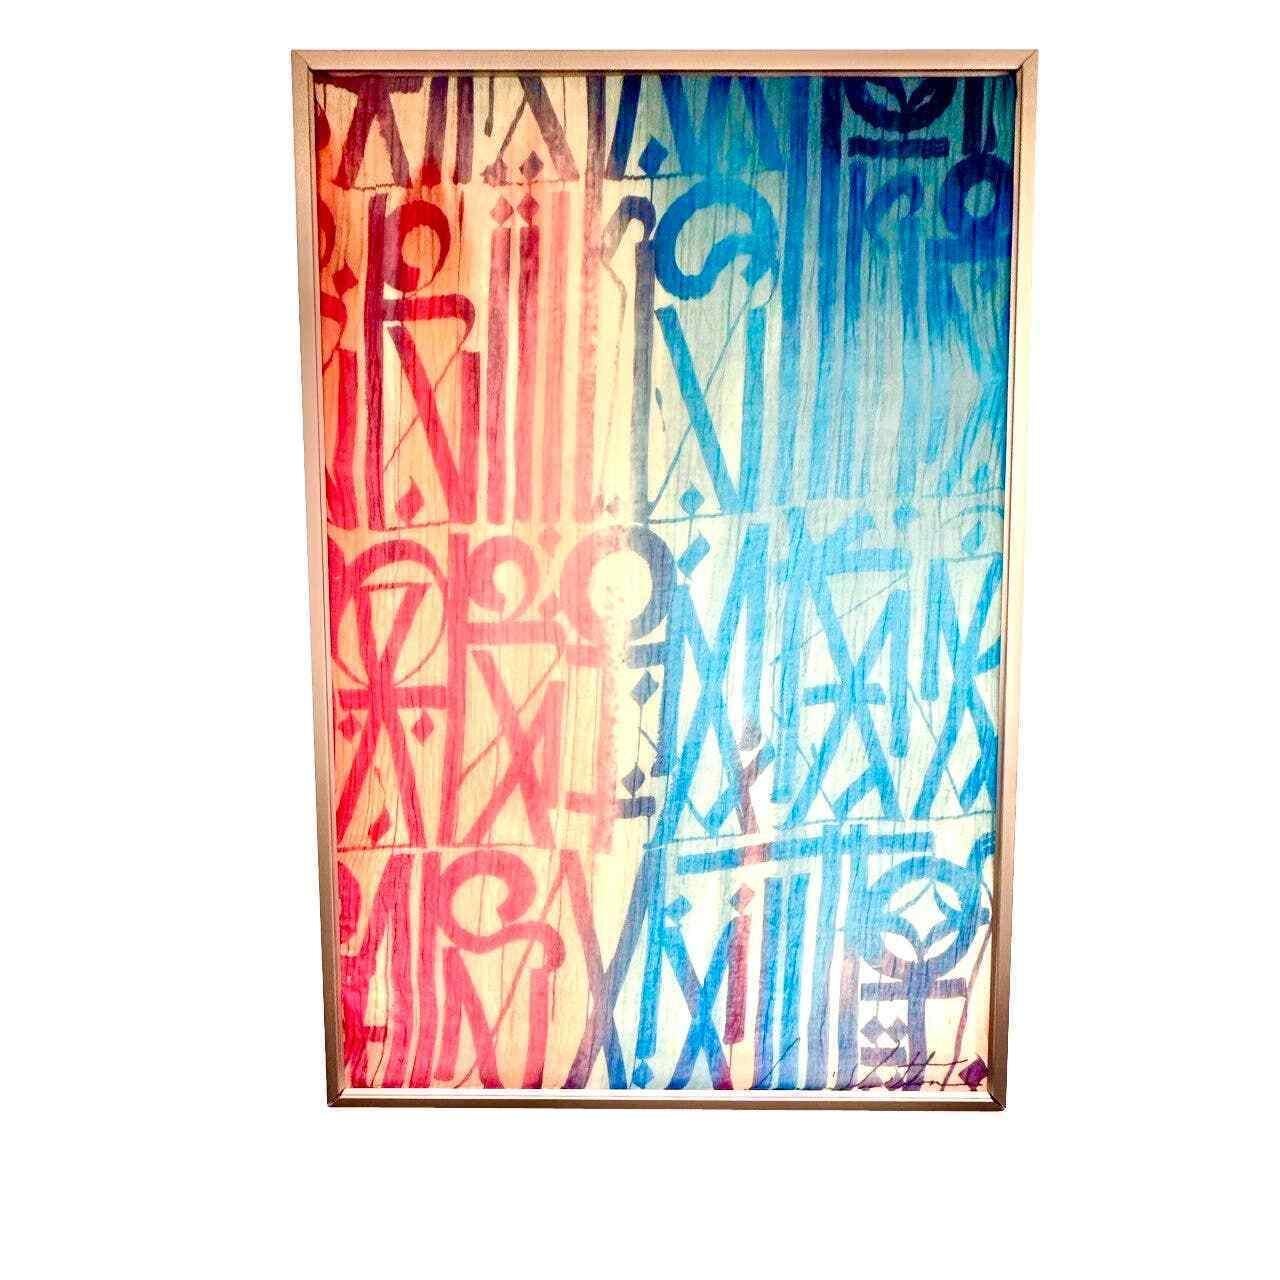 RETNA - Water Colours of Graffiti LV Collection, 2013

RETNA (Marquis Lewis), the internationally renowned street artist whose signature hieroglyphics are highly coveted by collectors on both sides of the Atlantic

The Famed French fashion house,